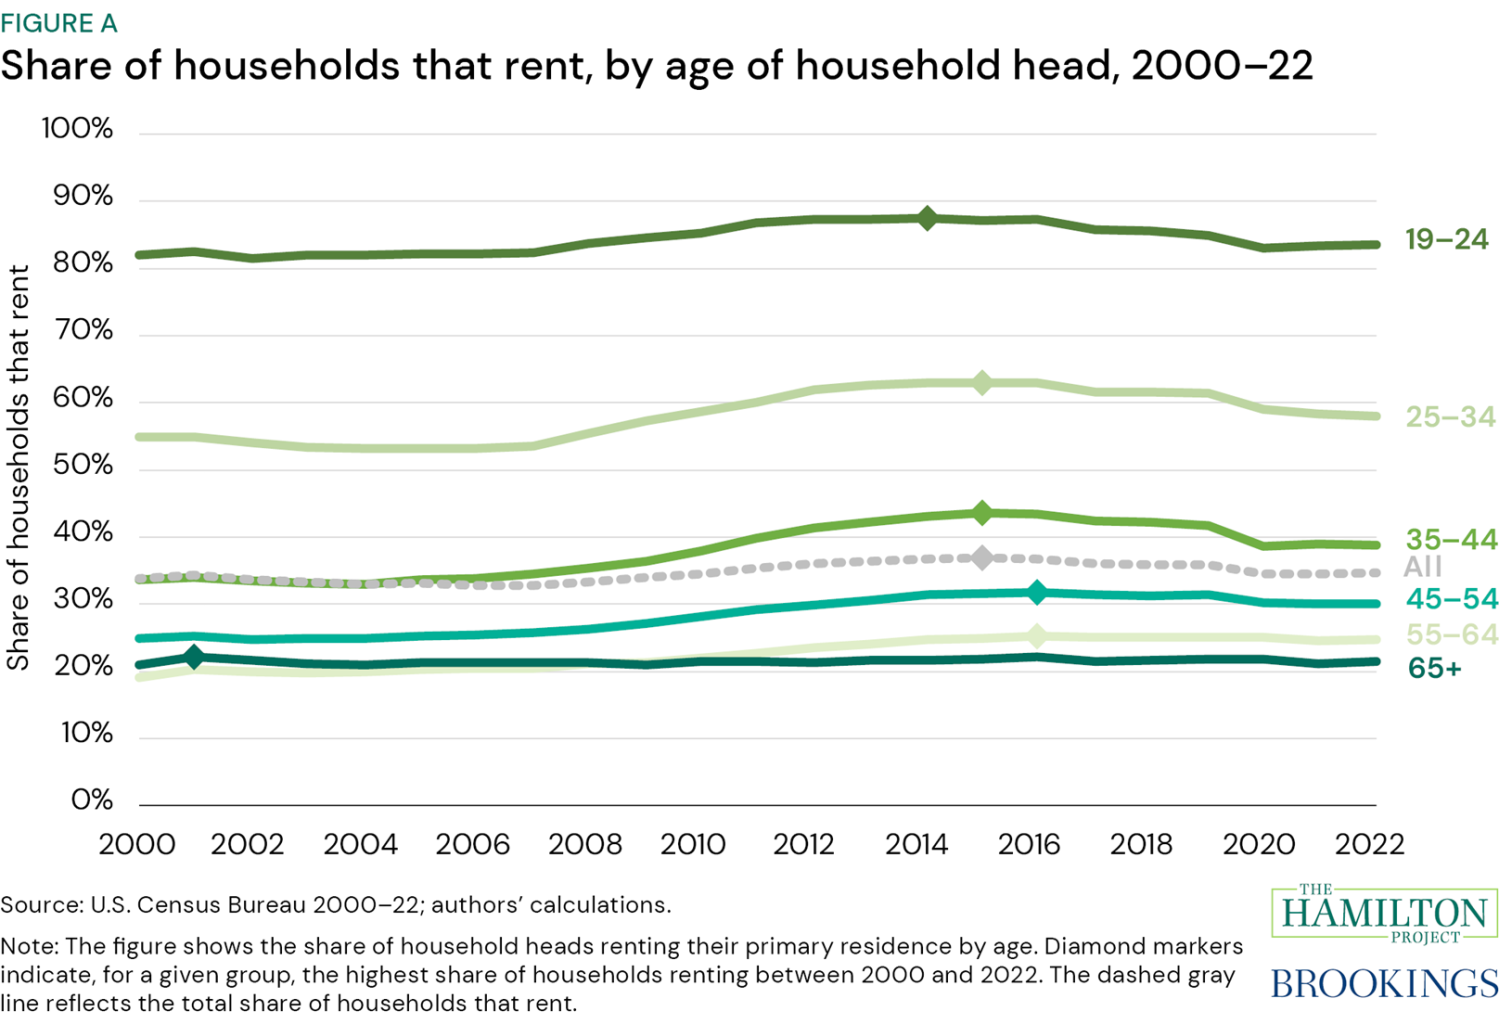 Figure A: Share of households that rent, by age of household head, 2000–22. Note: The figure shows the share of household heads renting their primary residence by age. In the U.S., approximately one-third of households rent, but the share varies considerably by age of the head of household, ranging from 21 percent of households headed by someone 65 and older to 58 percent of households headed by someone ages 25 to 34.